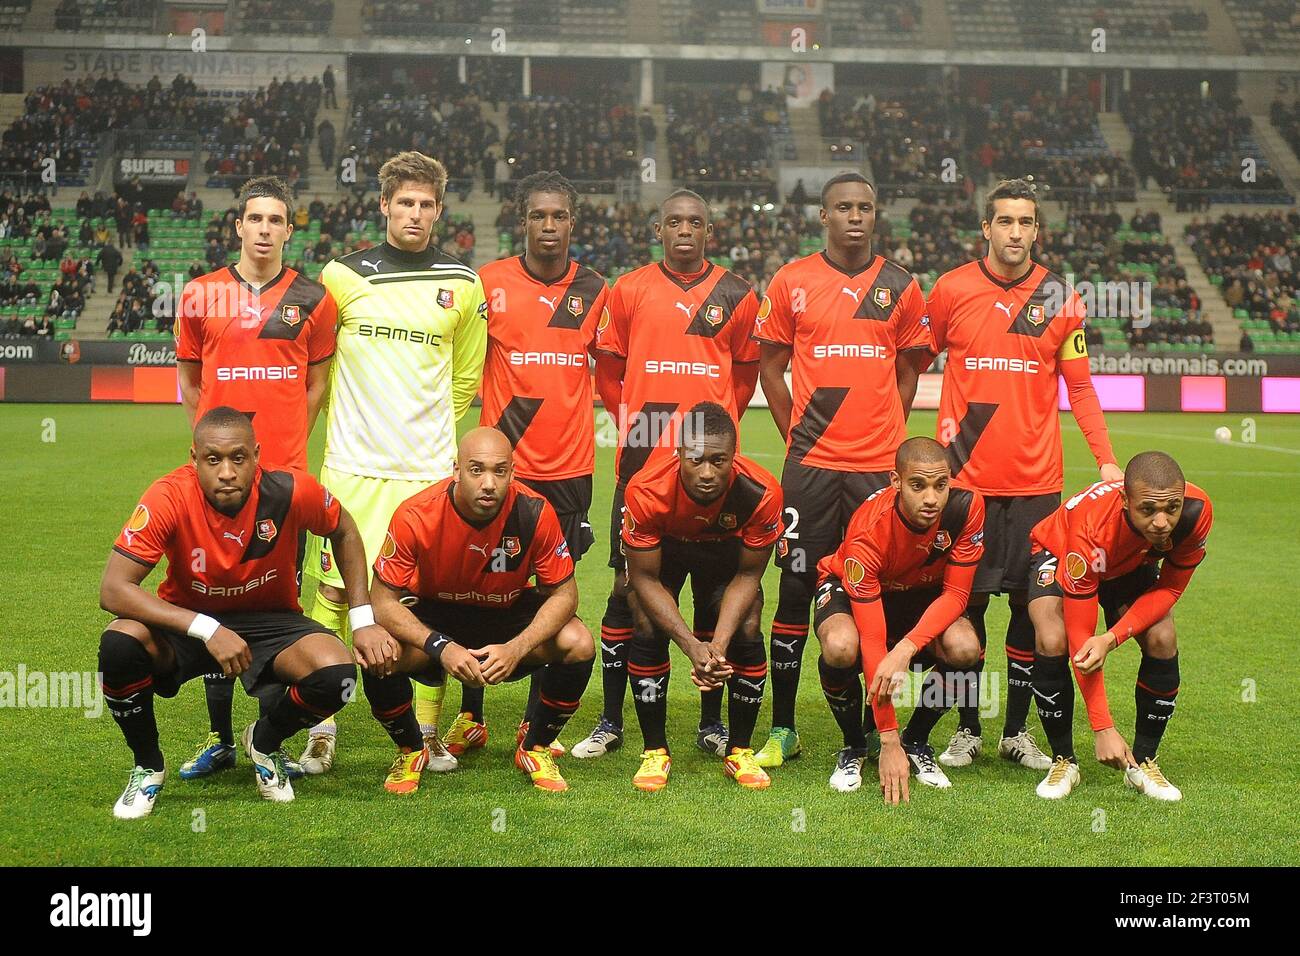 FOOTBALL - UEFA EUROPA LEAGUE 2011/2012 - GROUP STAGE - GROUP I - STADE  RENNAIS v UDINESE - 30/11/2011 - PHOTO PASCAL ALLEE / DPPI - TEAM RENNES (  BACK ROW LEFT